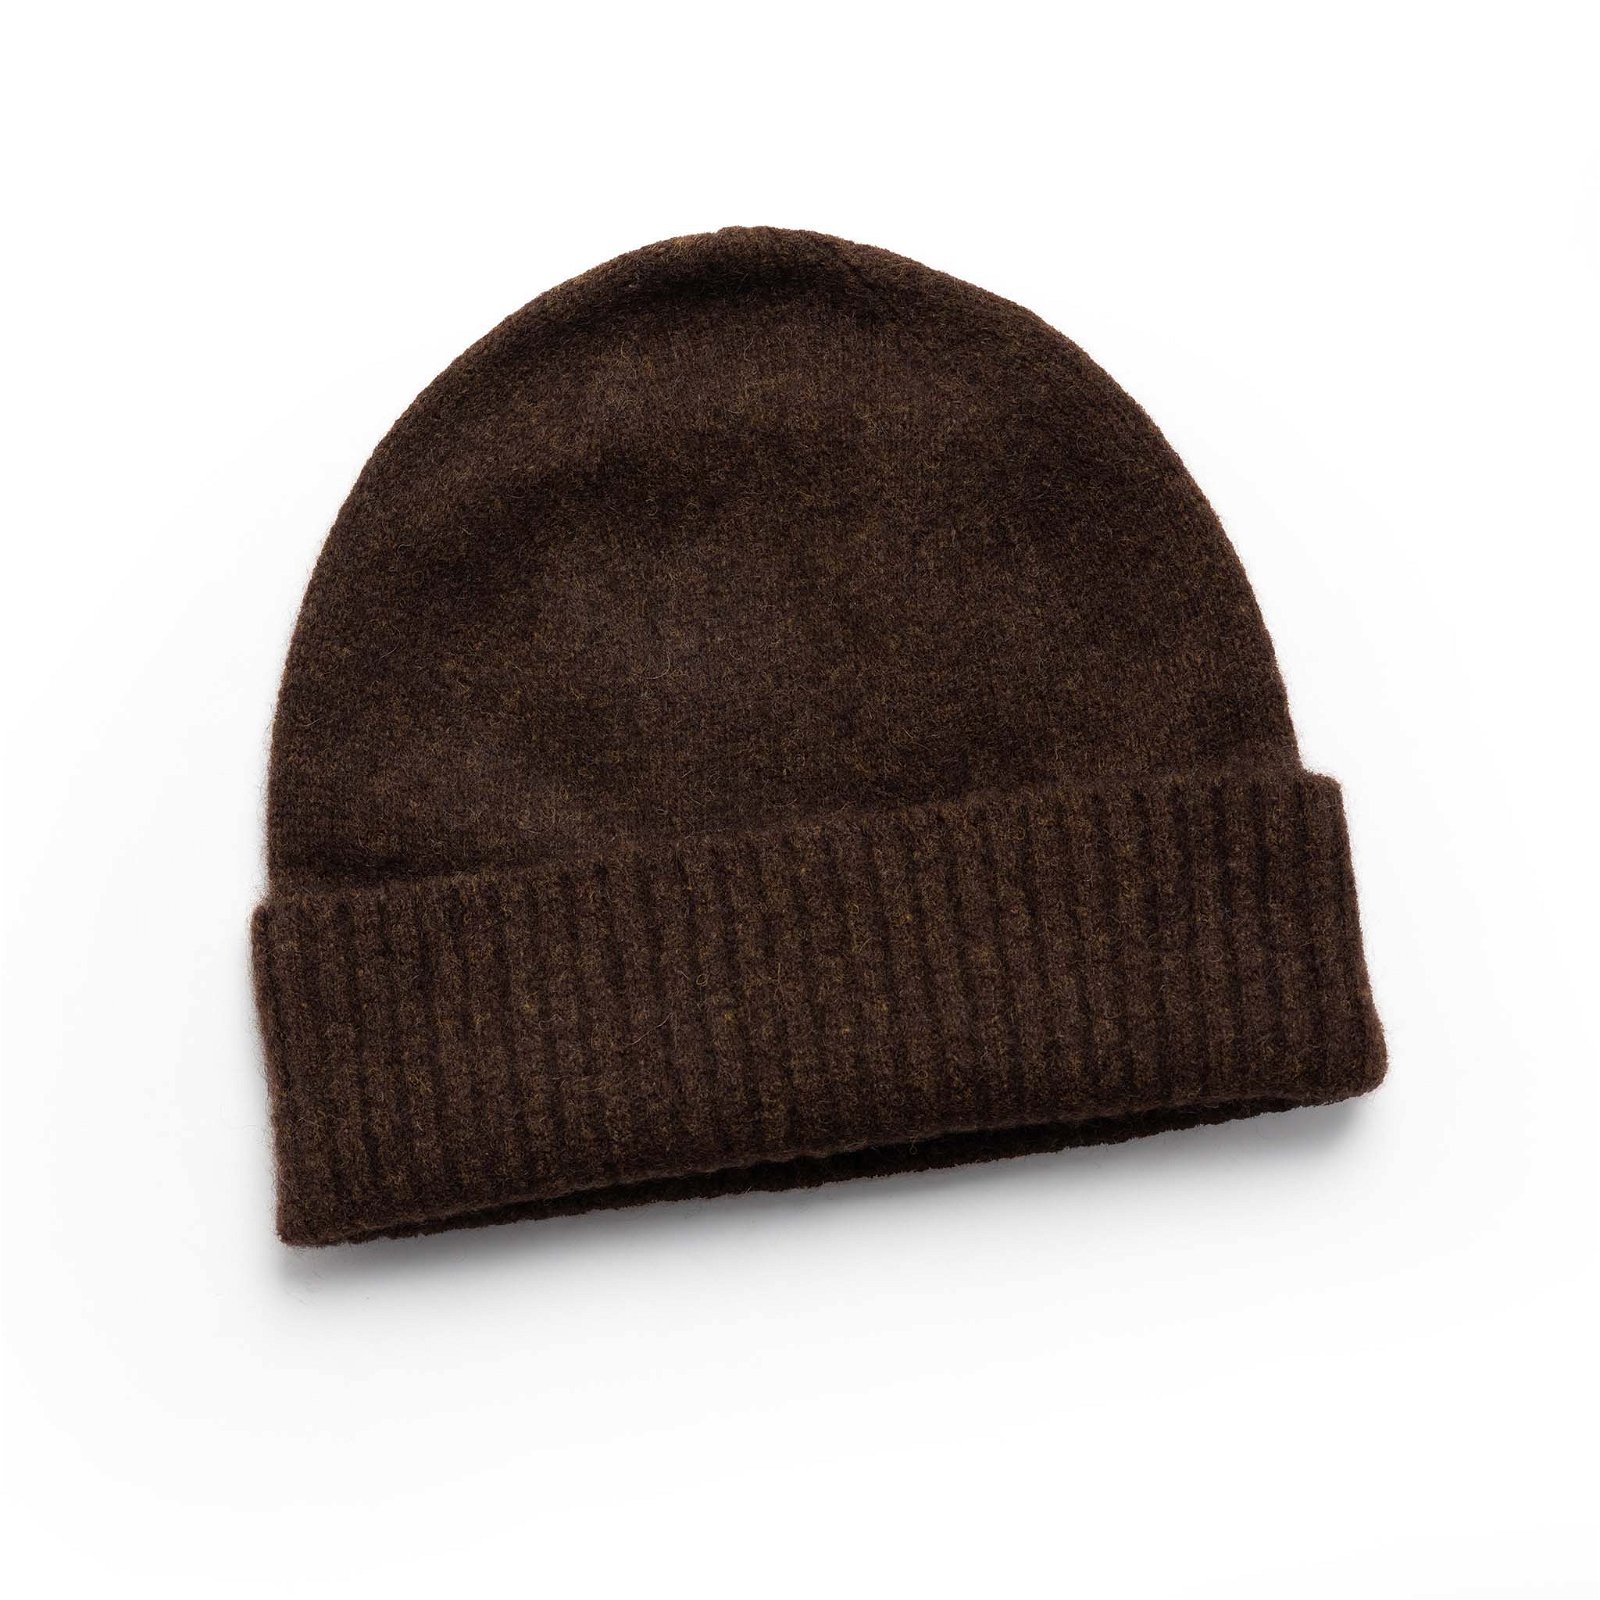 Image of The Lodge Beanie in Coffee